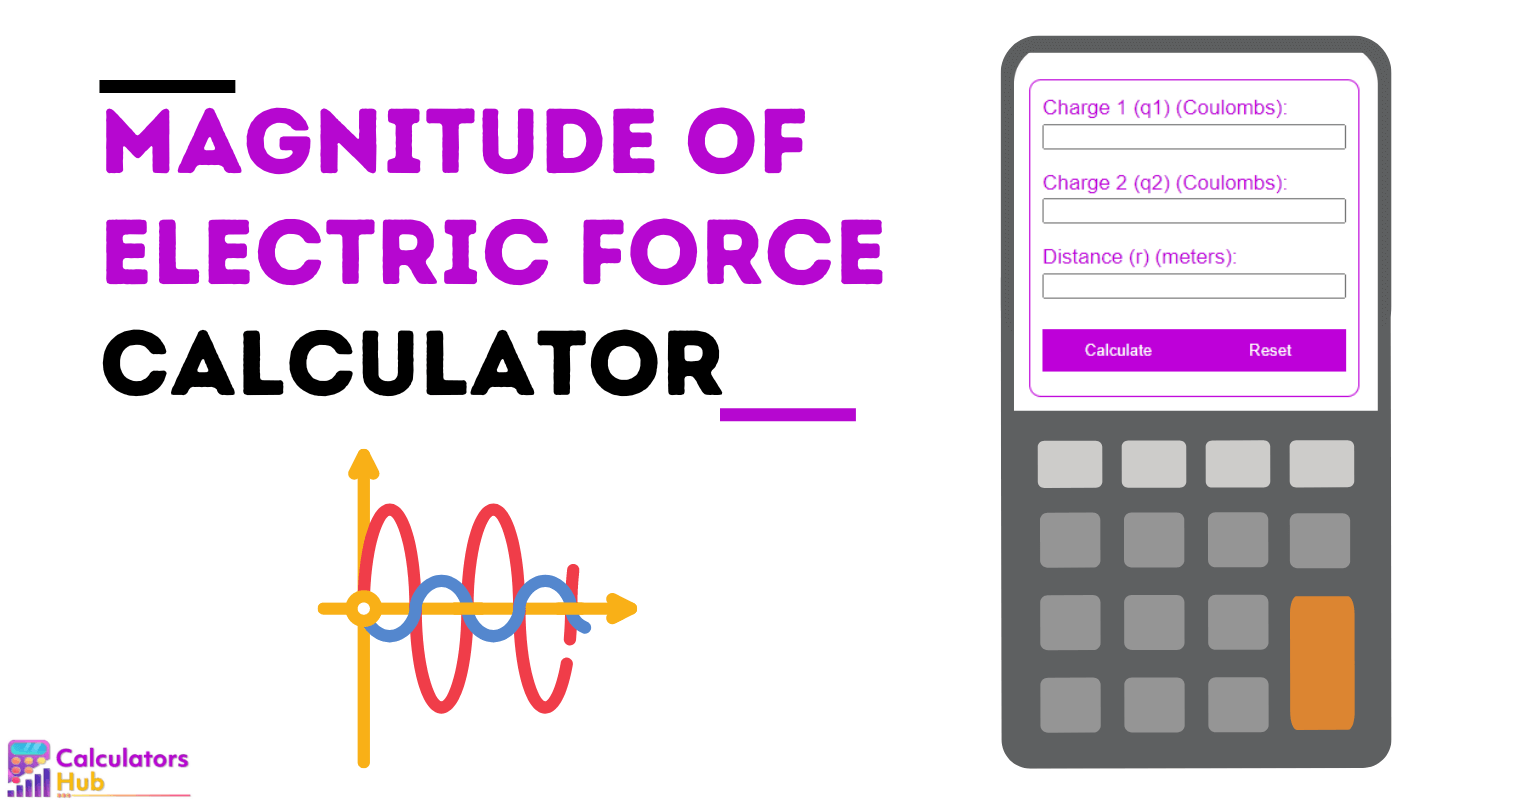 Magnitude of Electric Force Calculator